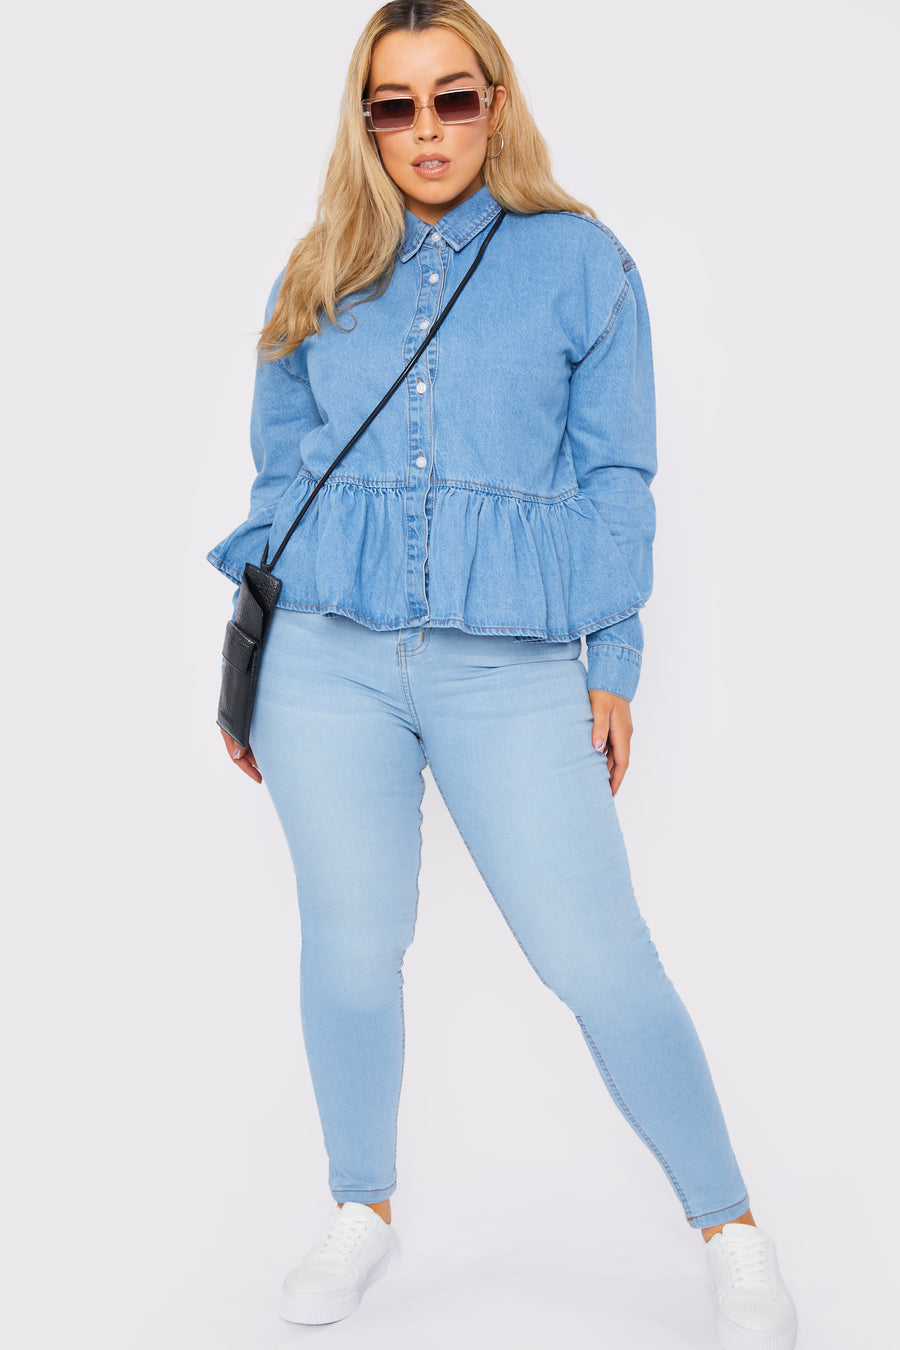 Full body style shot of a standing plus size female model wearing a JMOJO Light Blue Wash Peplum Denim Frill Shirt with a handbag over her shoulder and wearing sunglasses